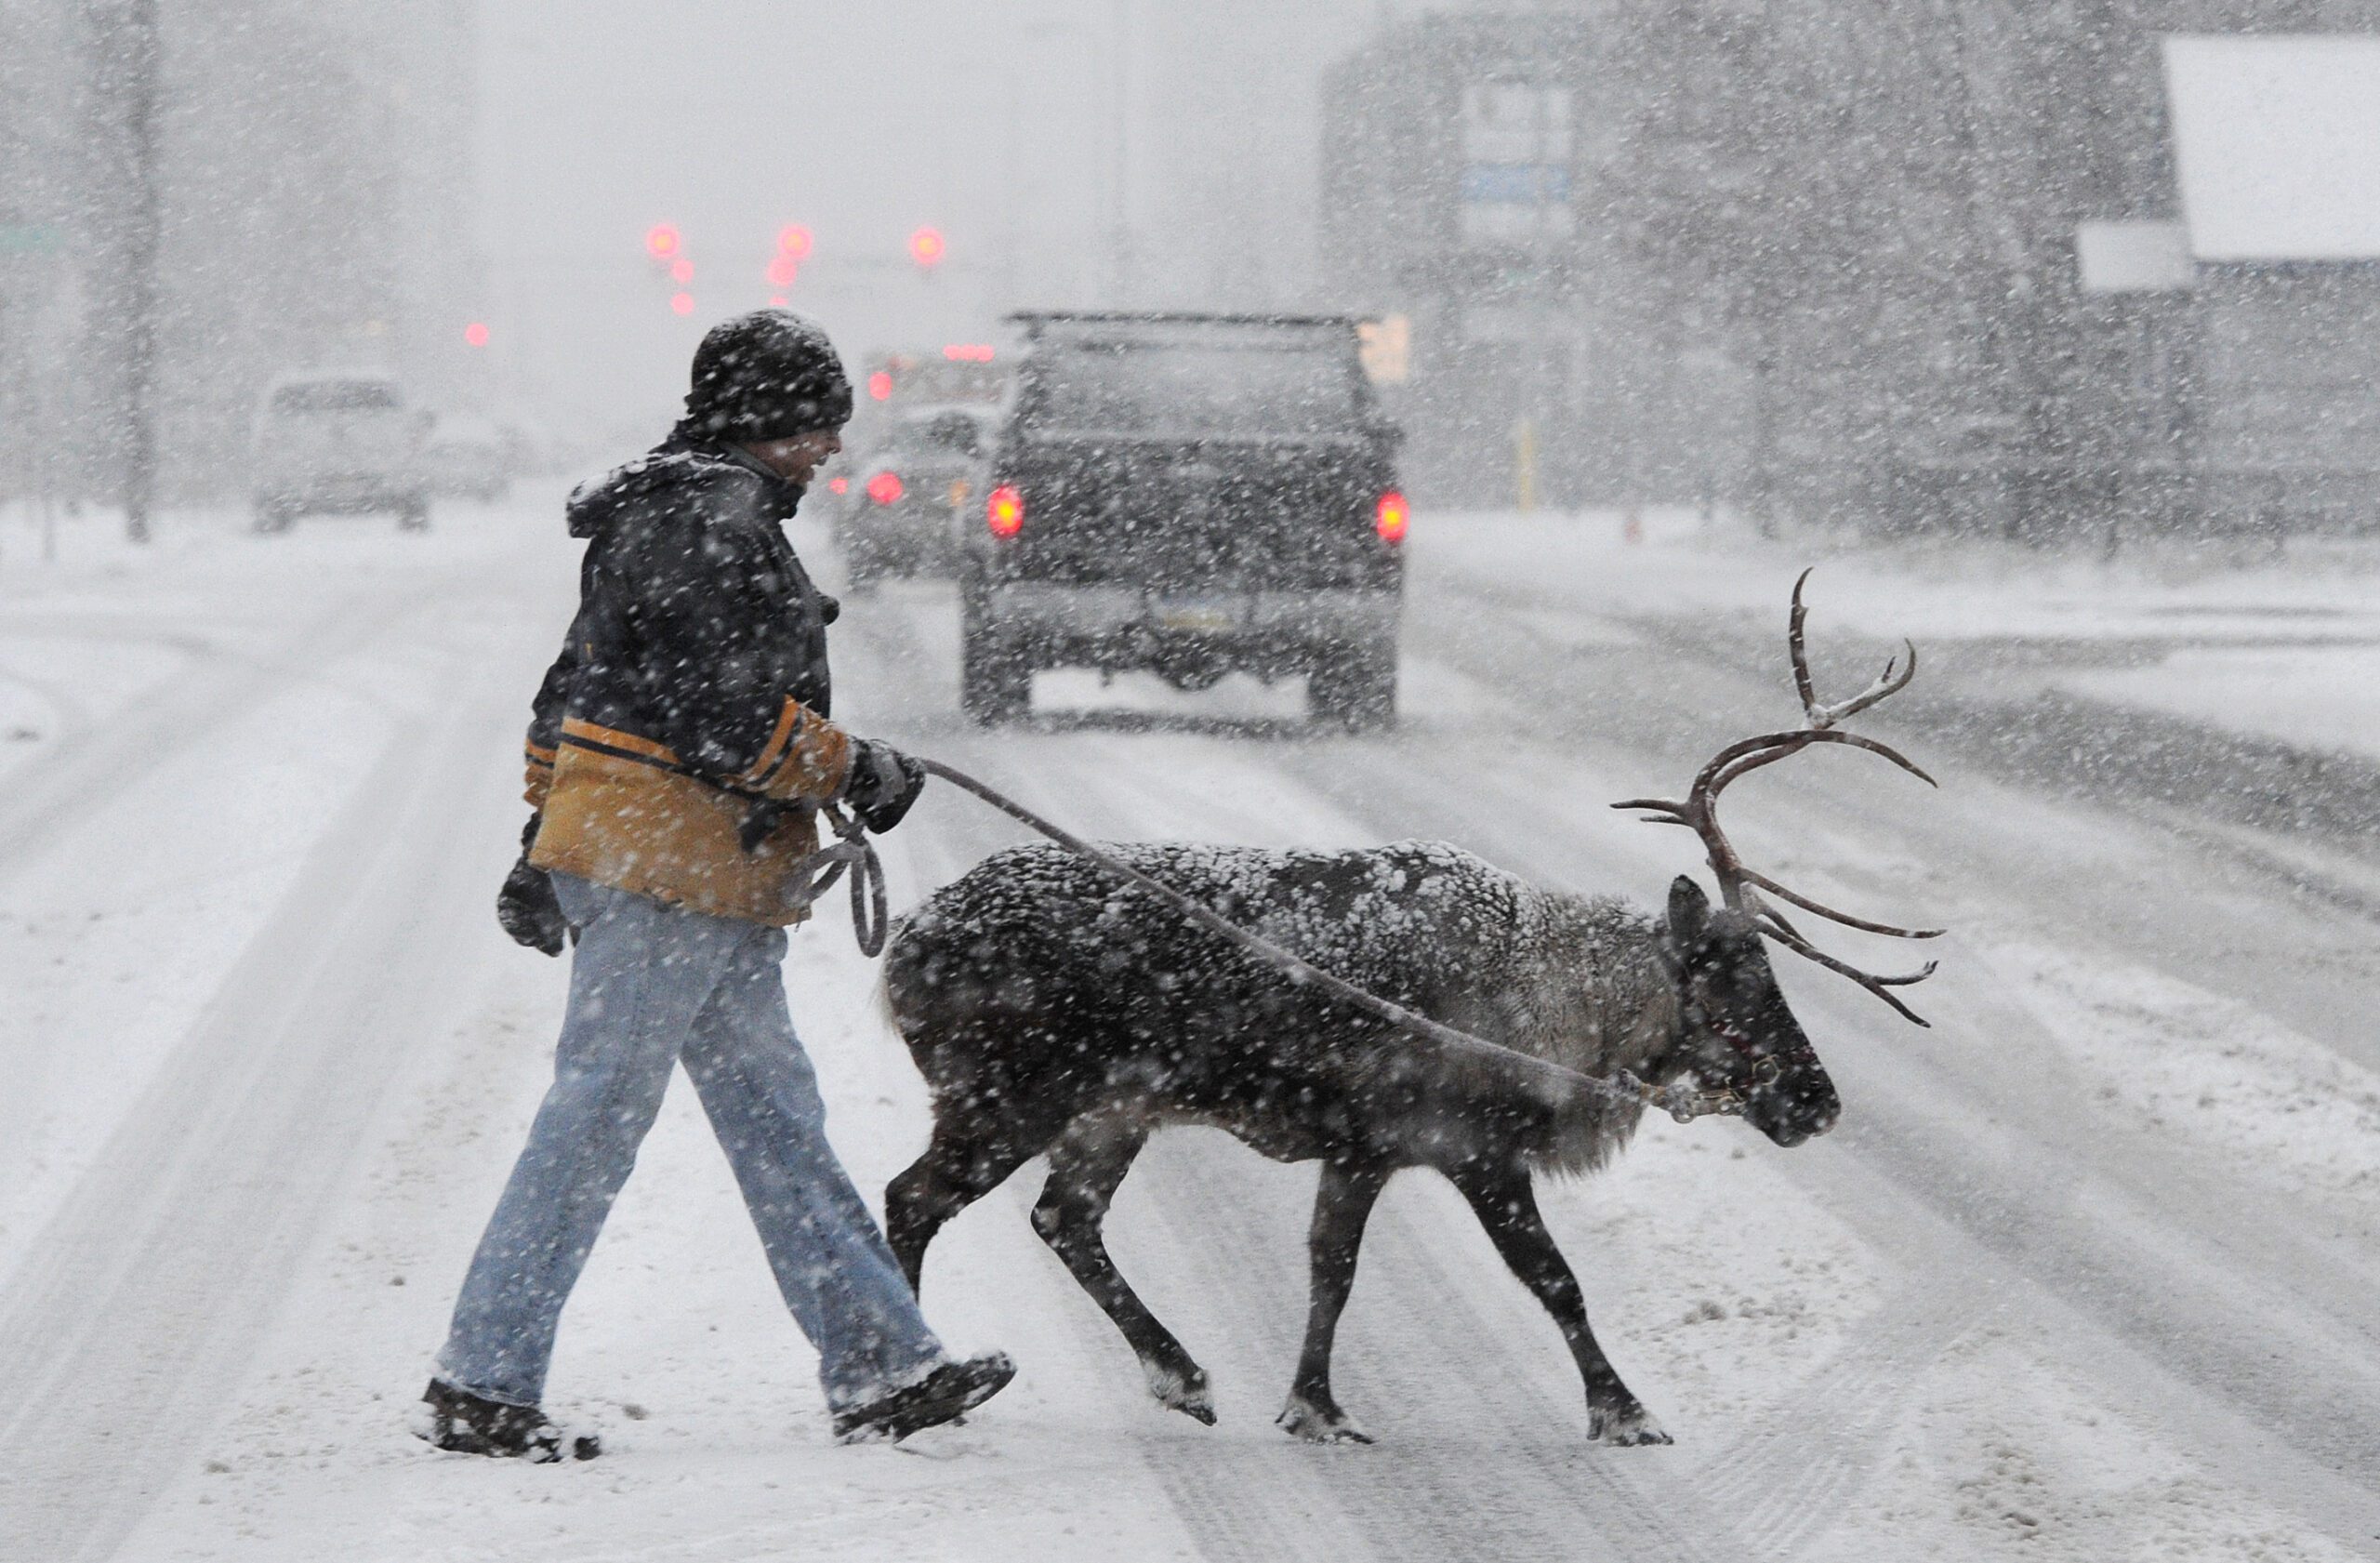 David Hall and Star the Reindeer cross I Street in downtown Anchorage while walking in a snowstorm on Sunday, November 10, 2013.  (Bill Roth / Anchorage Daily News)